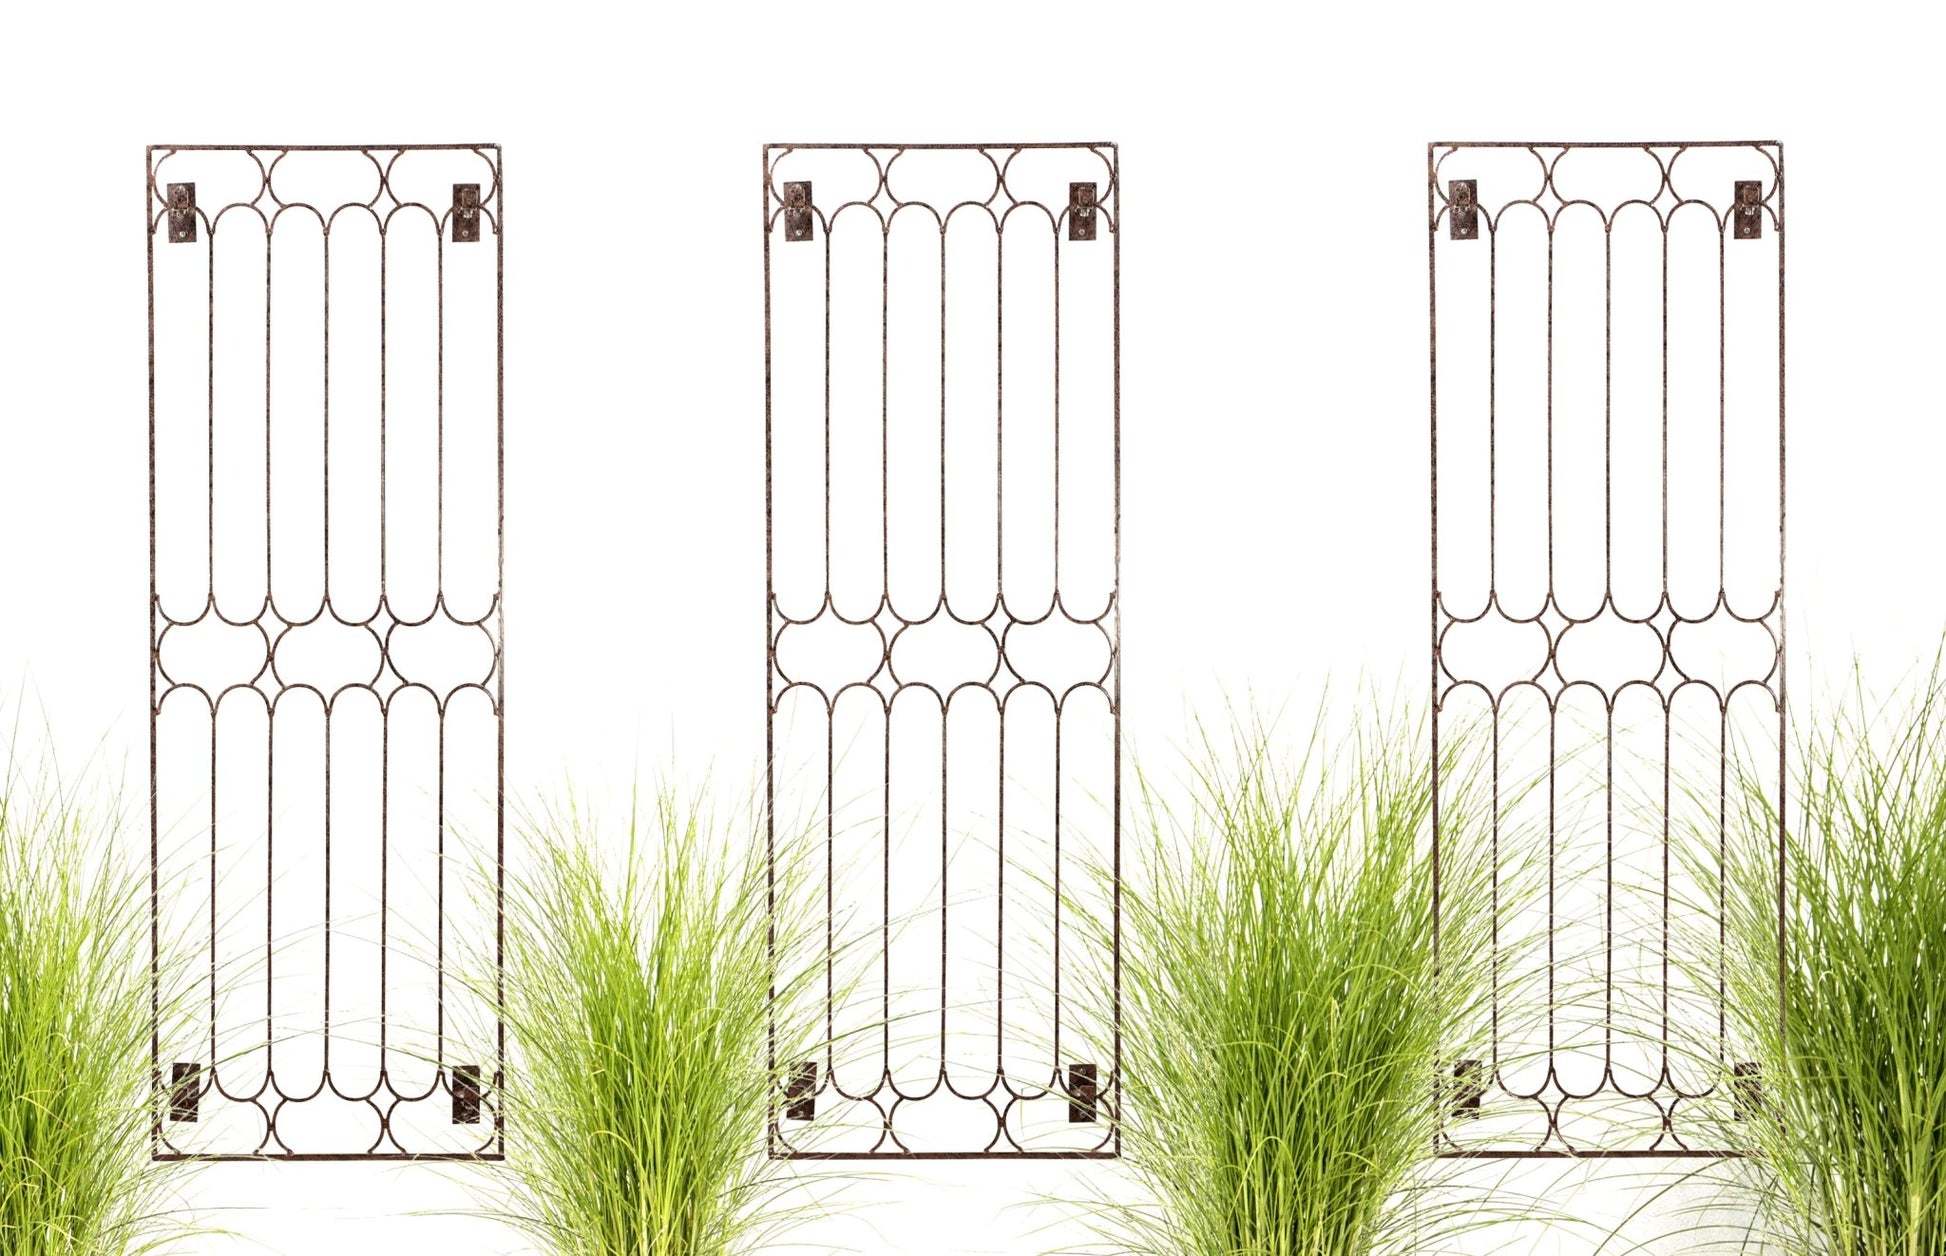 H Potter Set of 3 Garden Trellis For Climbing Plants Large Wrought Iron Panels with Wall Brackets